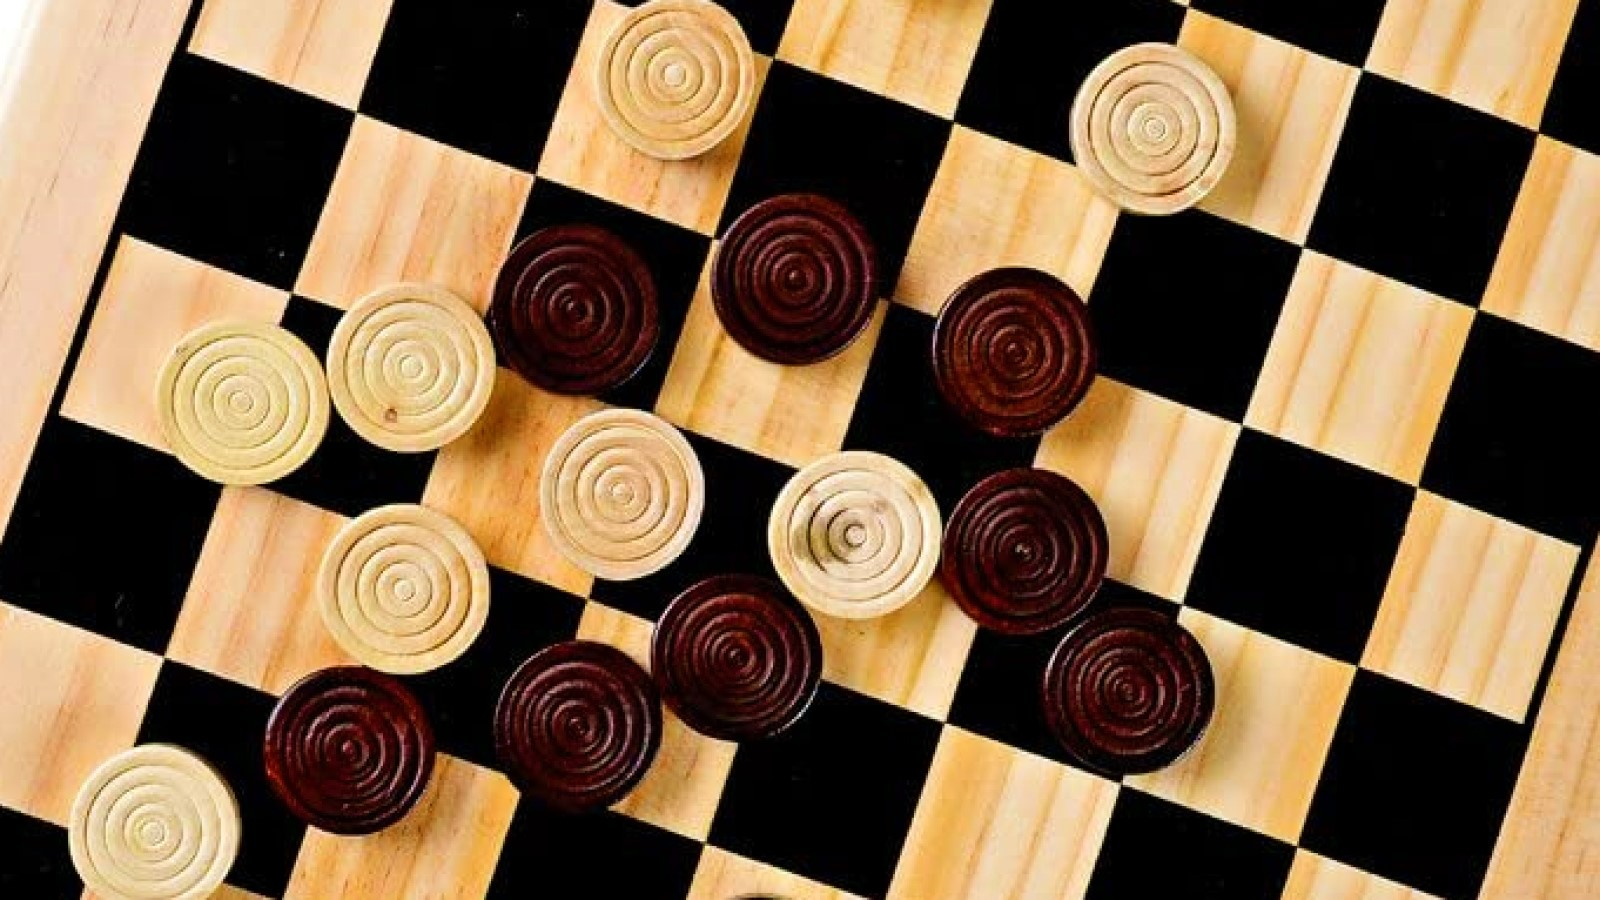 How to Play Checkers